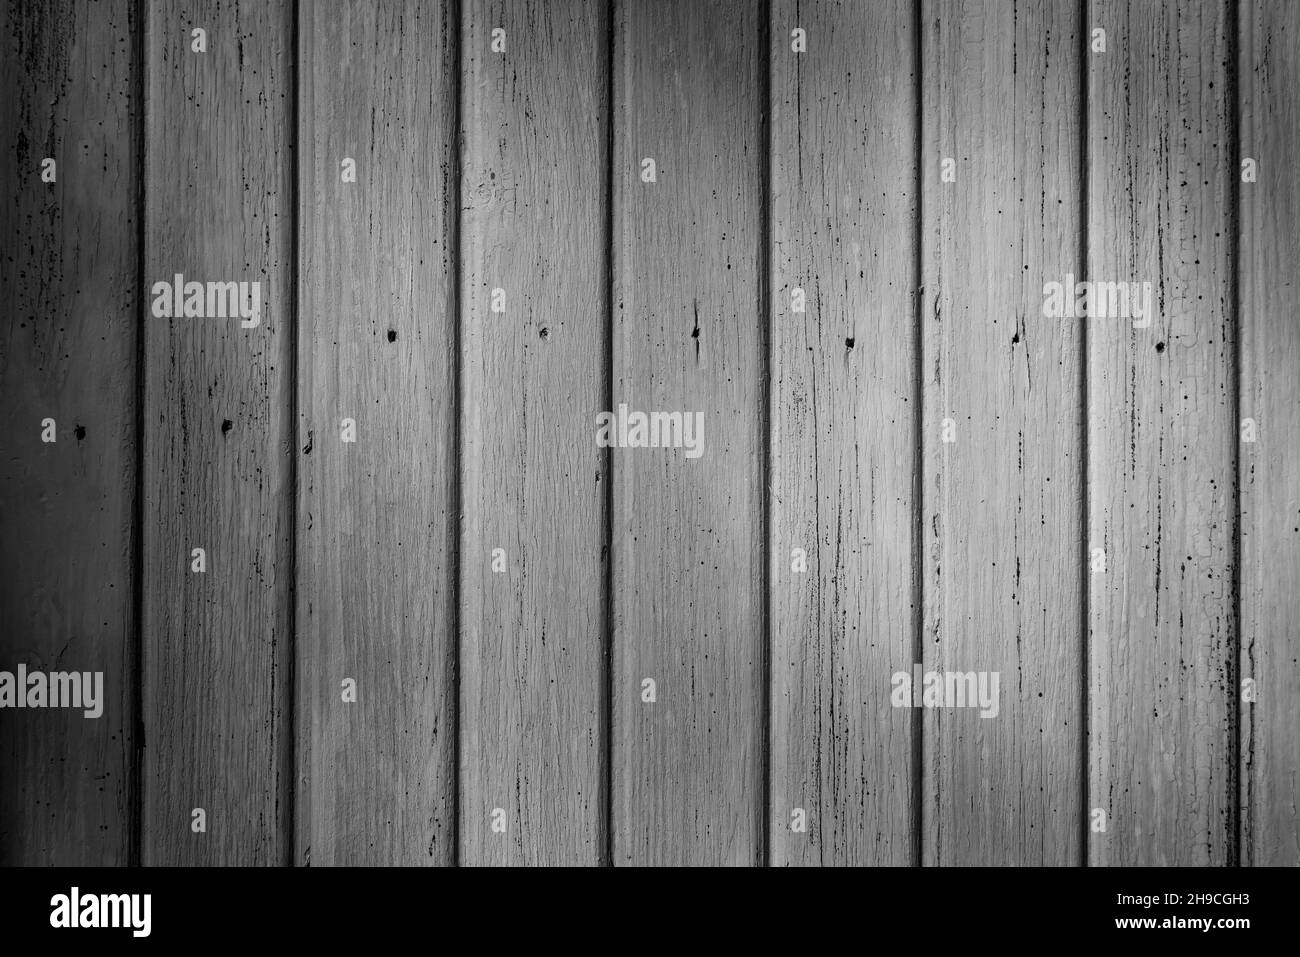 Front view of an old weathered and painted wooden wall or wood paneling. Abstract high resolution full frame textured background in black and white. Stock Photo